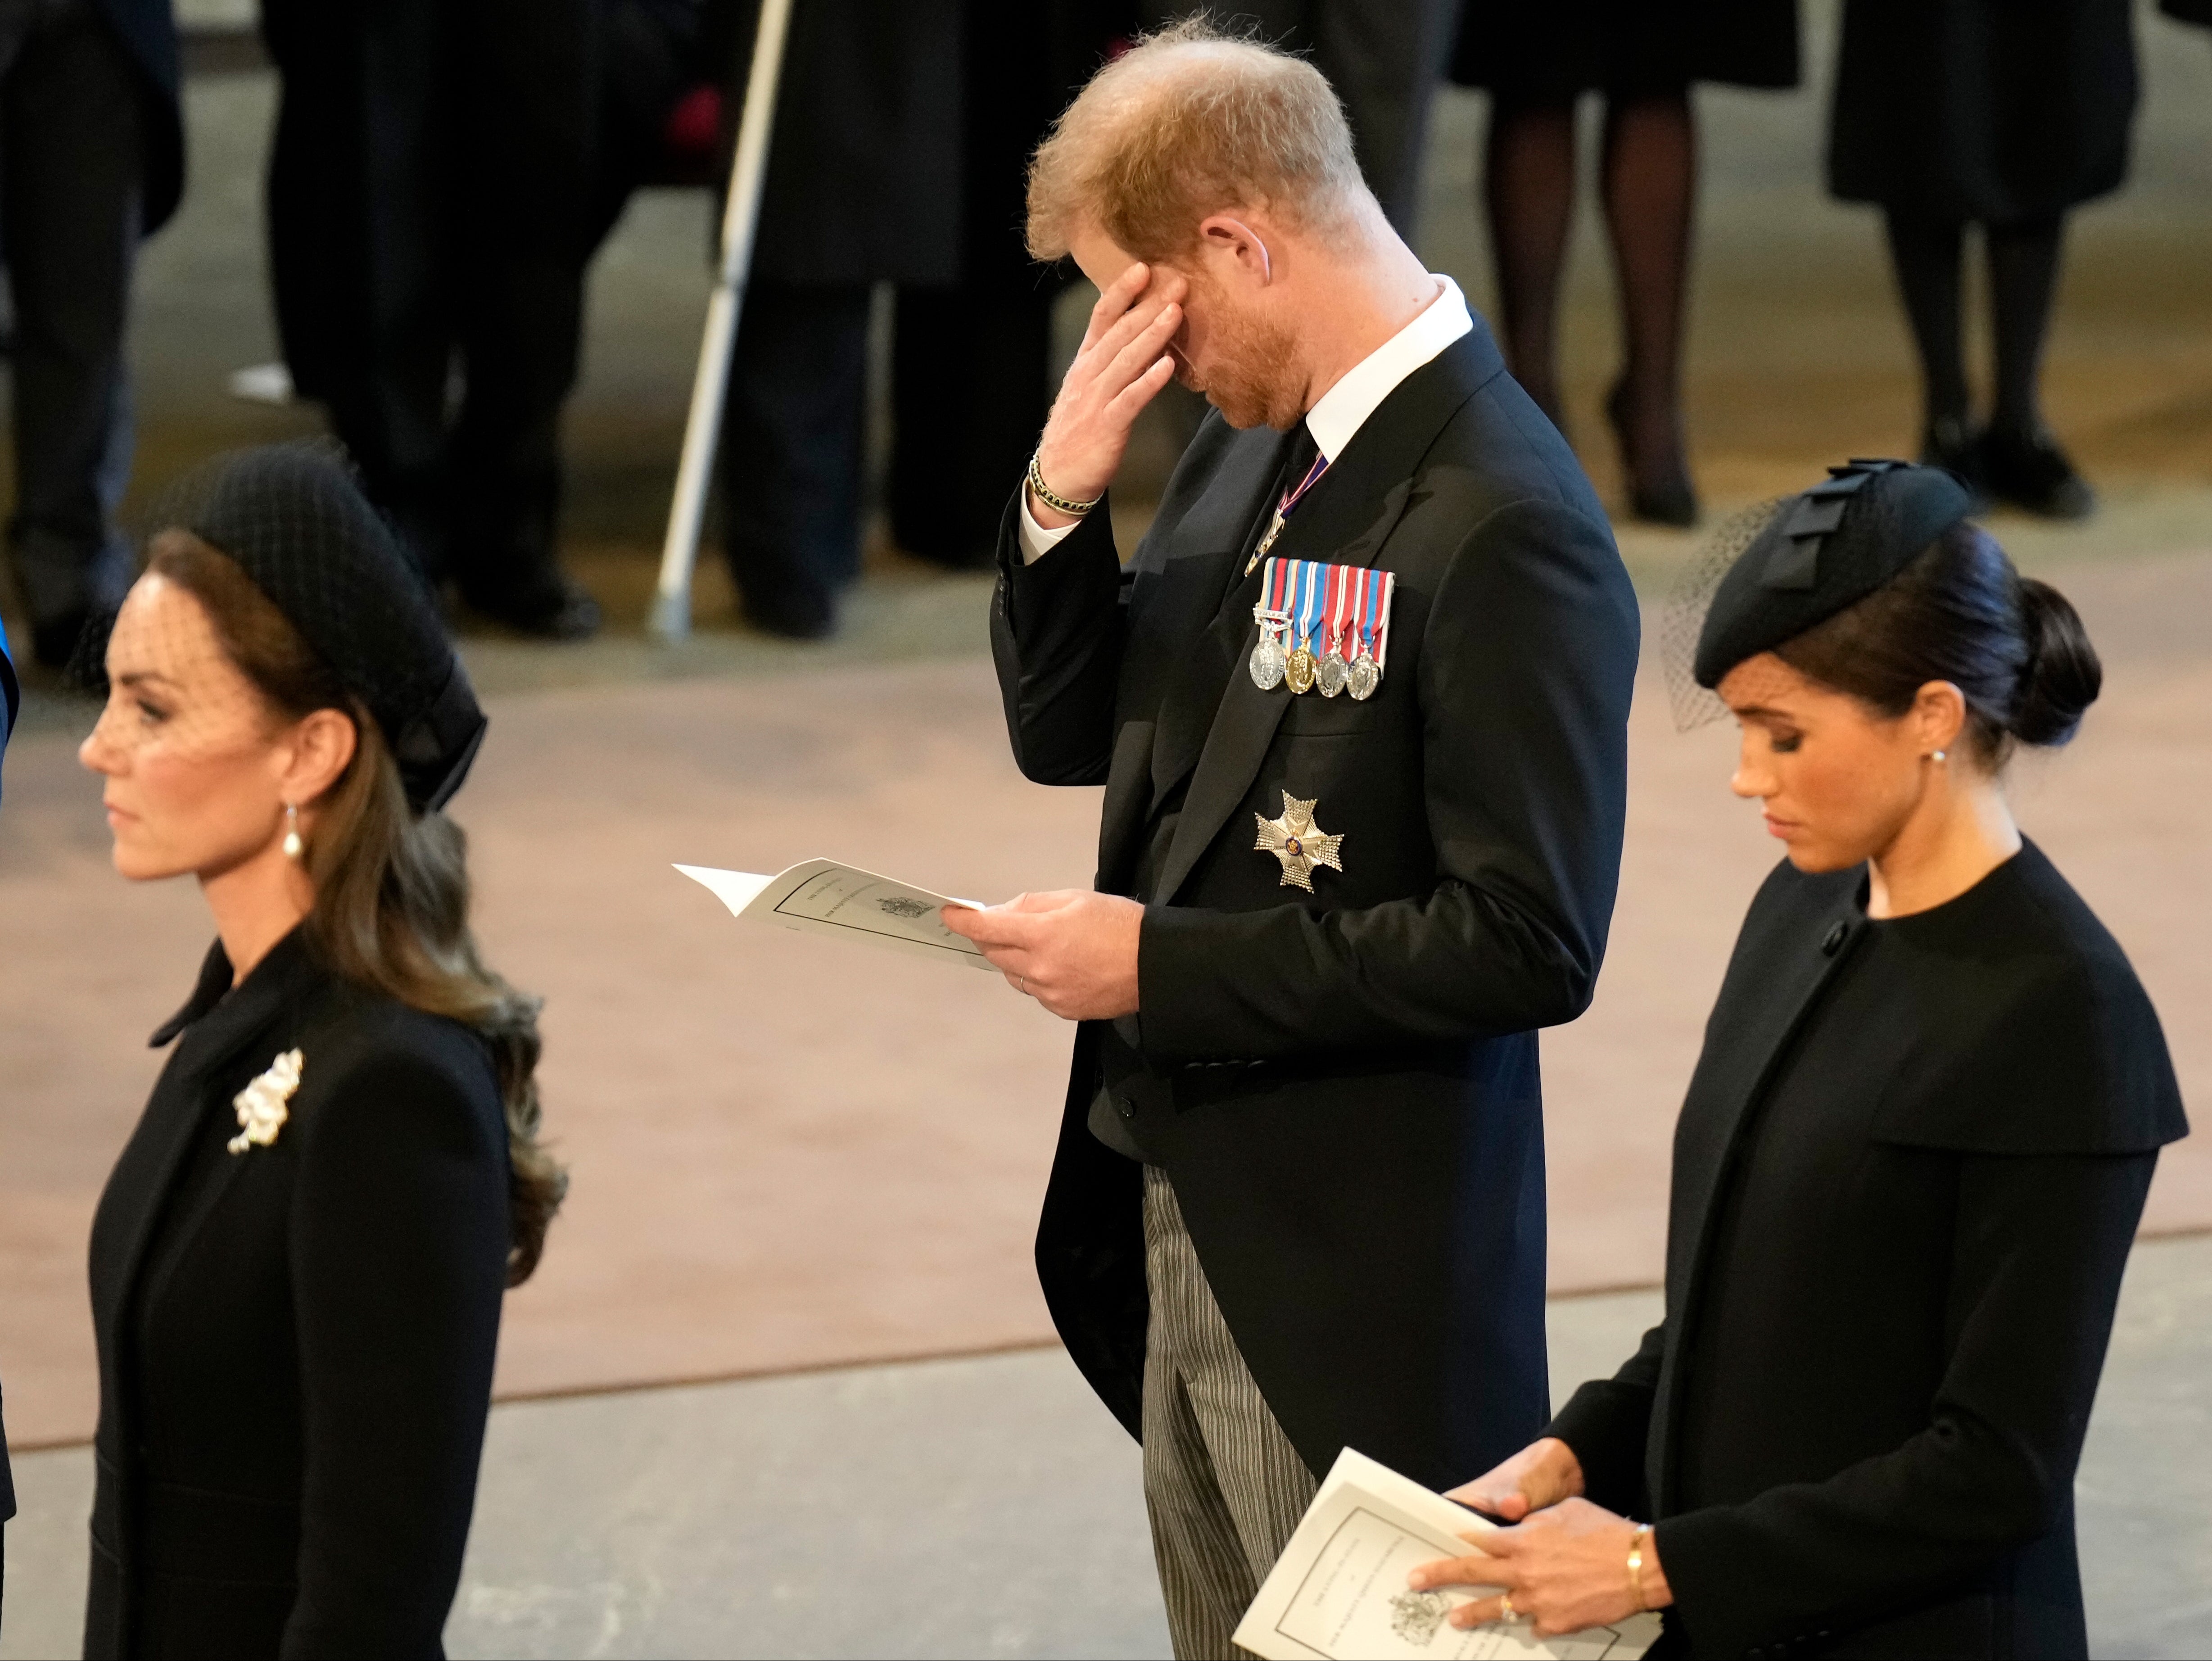 Prince Harry cannot hide his emotion at the lying-in-state